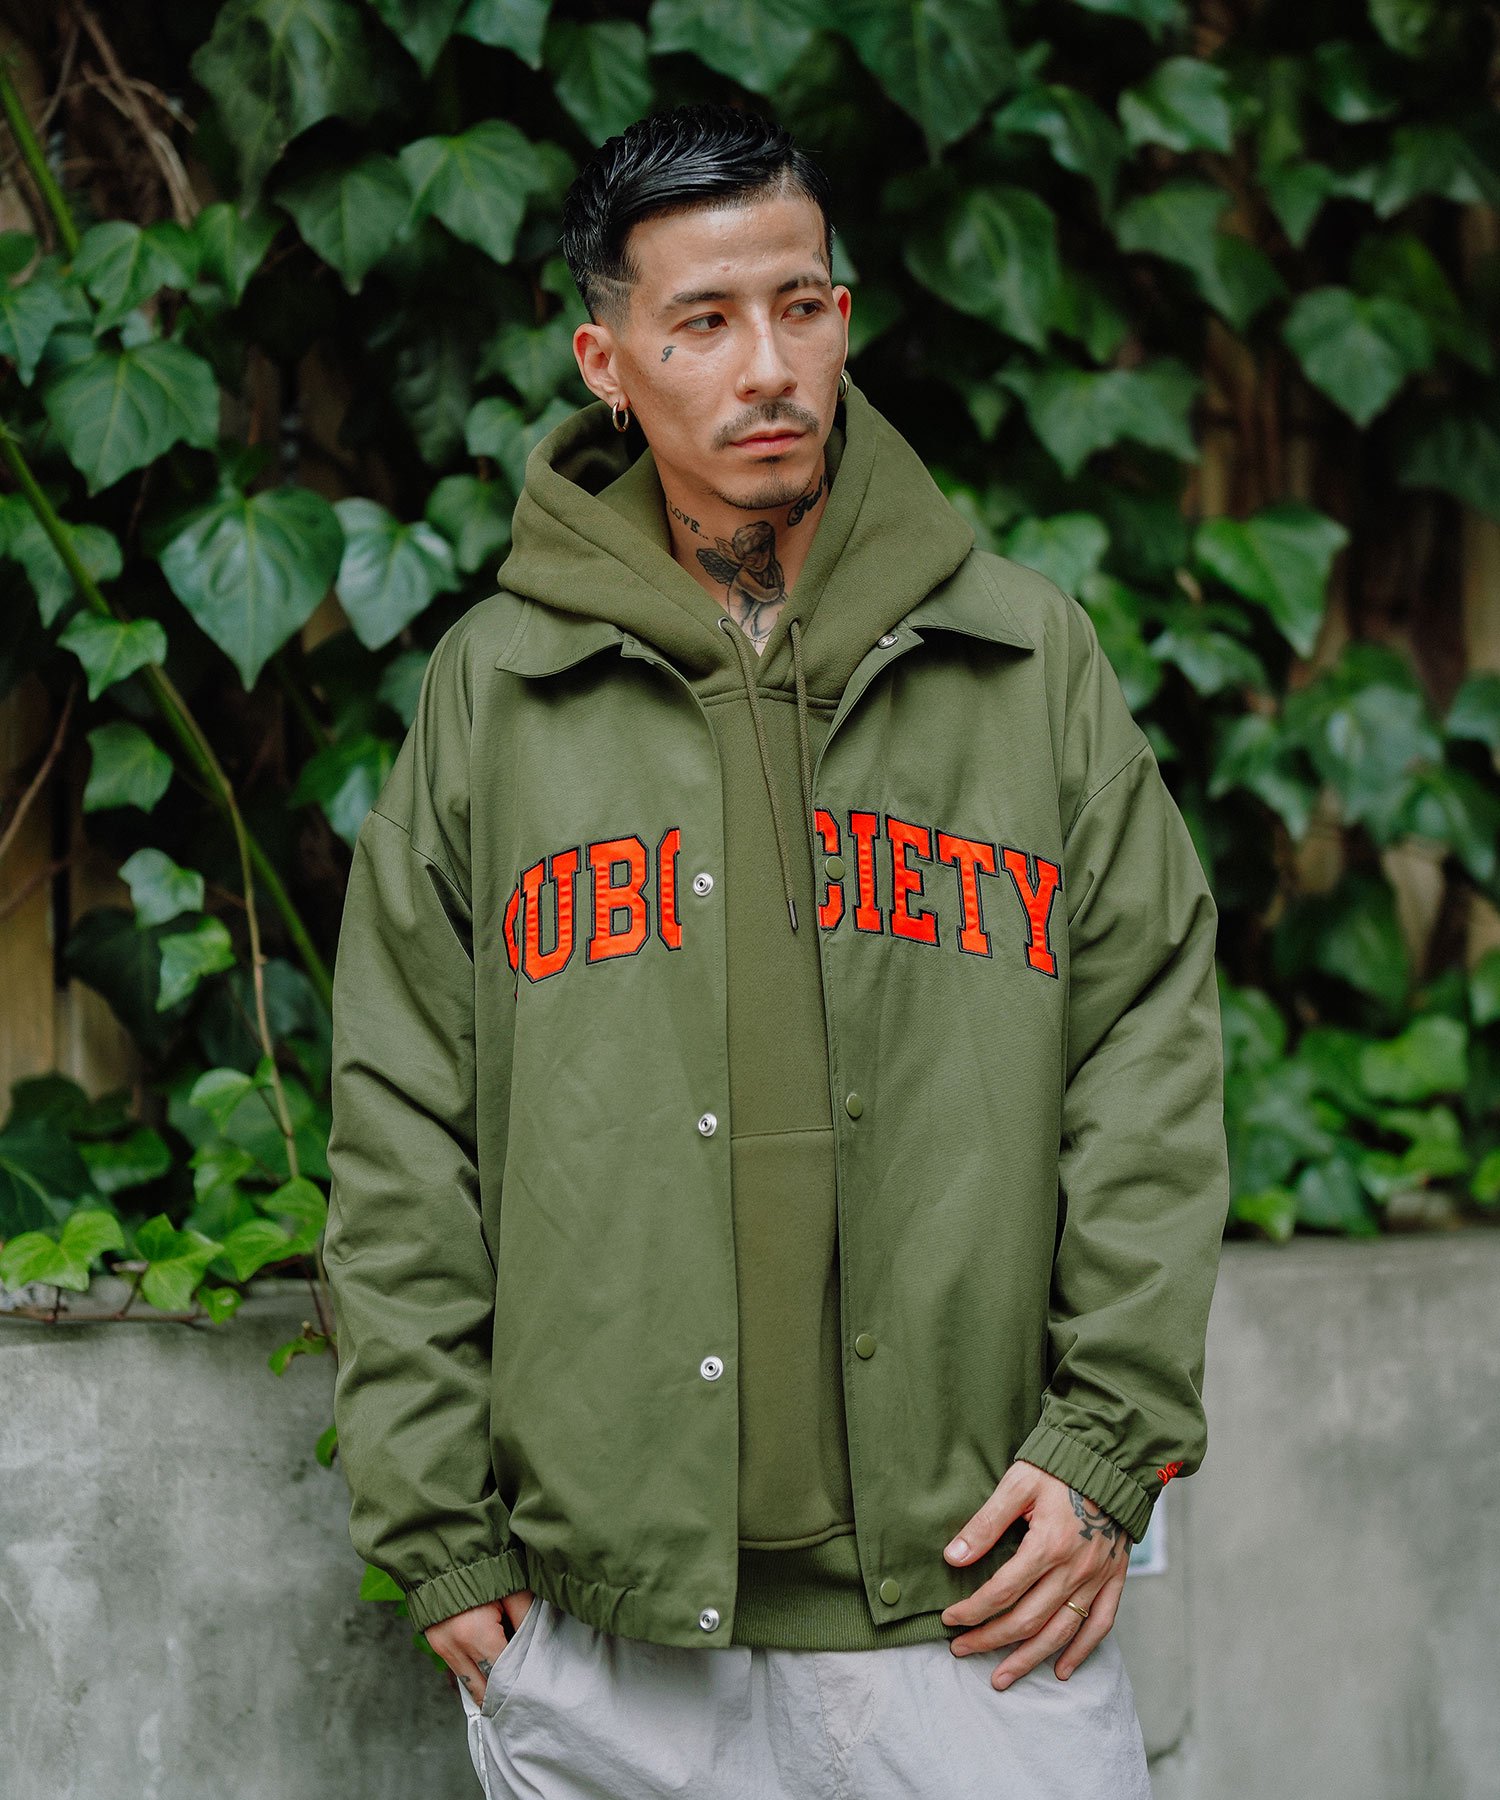 COACH SWING TOP - Subciety Online Store